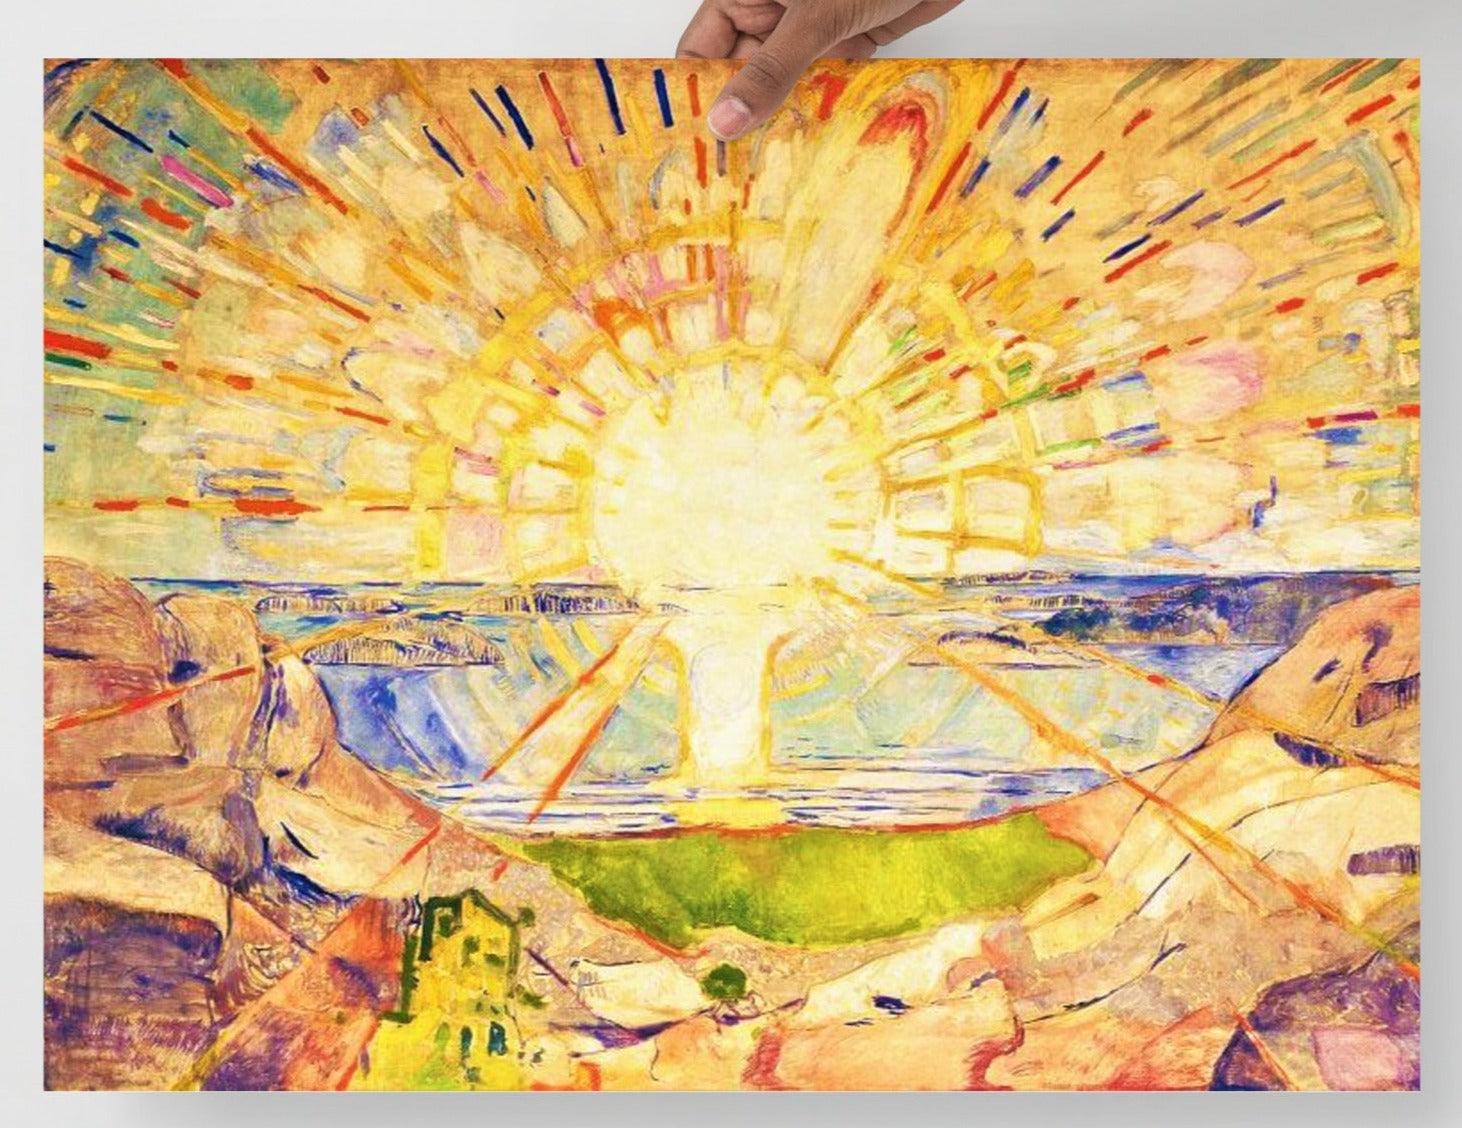 The Sun By Edvard Munch poster on a plain backdrop in size 18x24”.